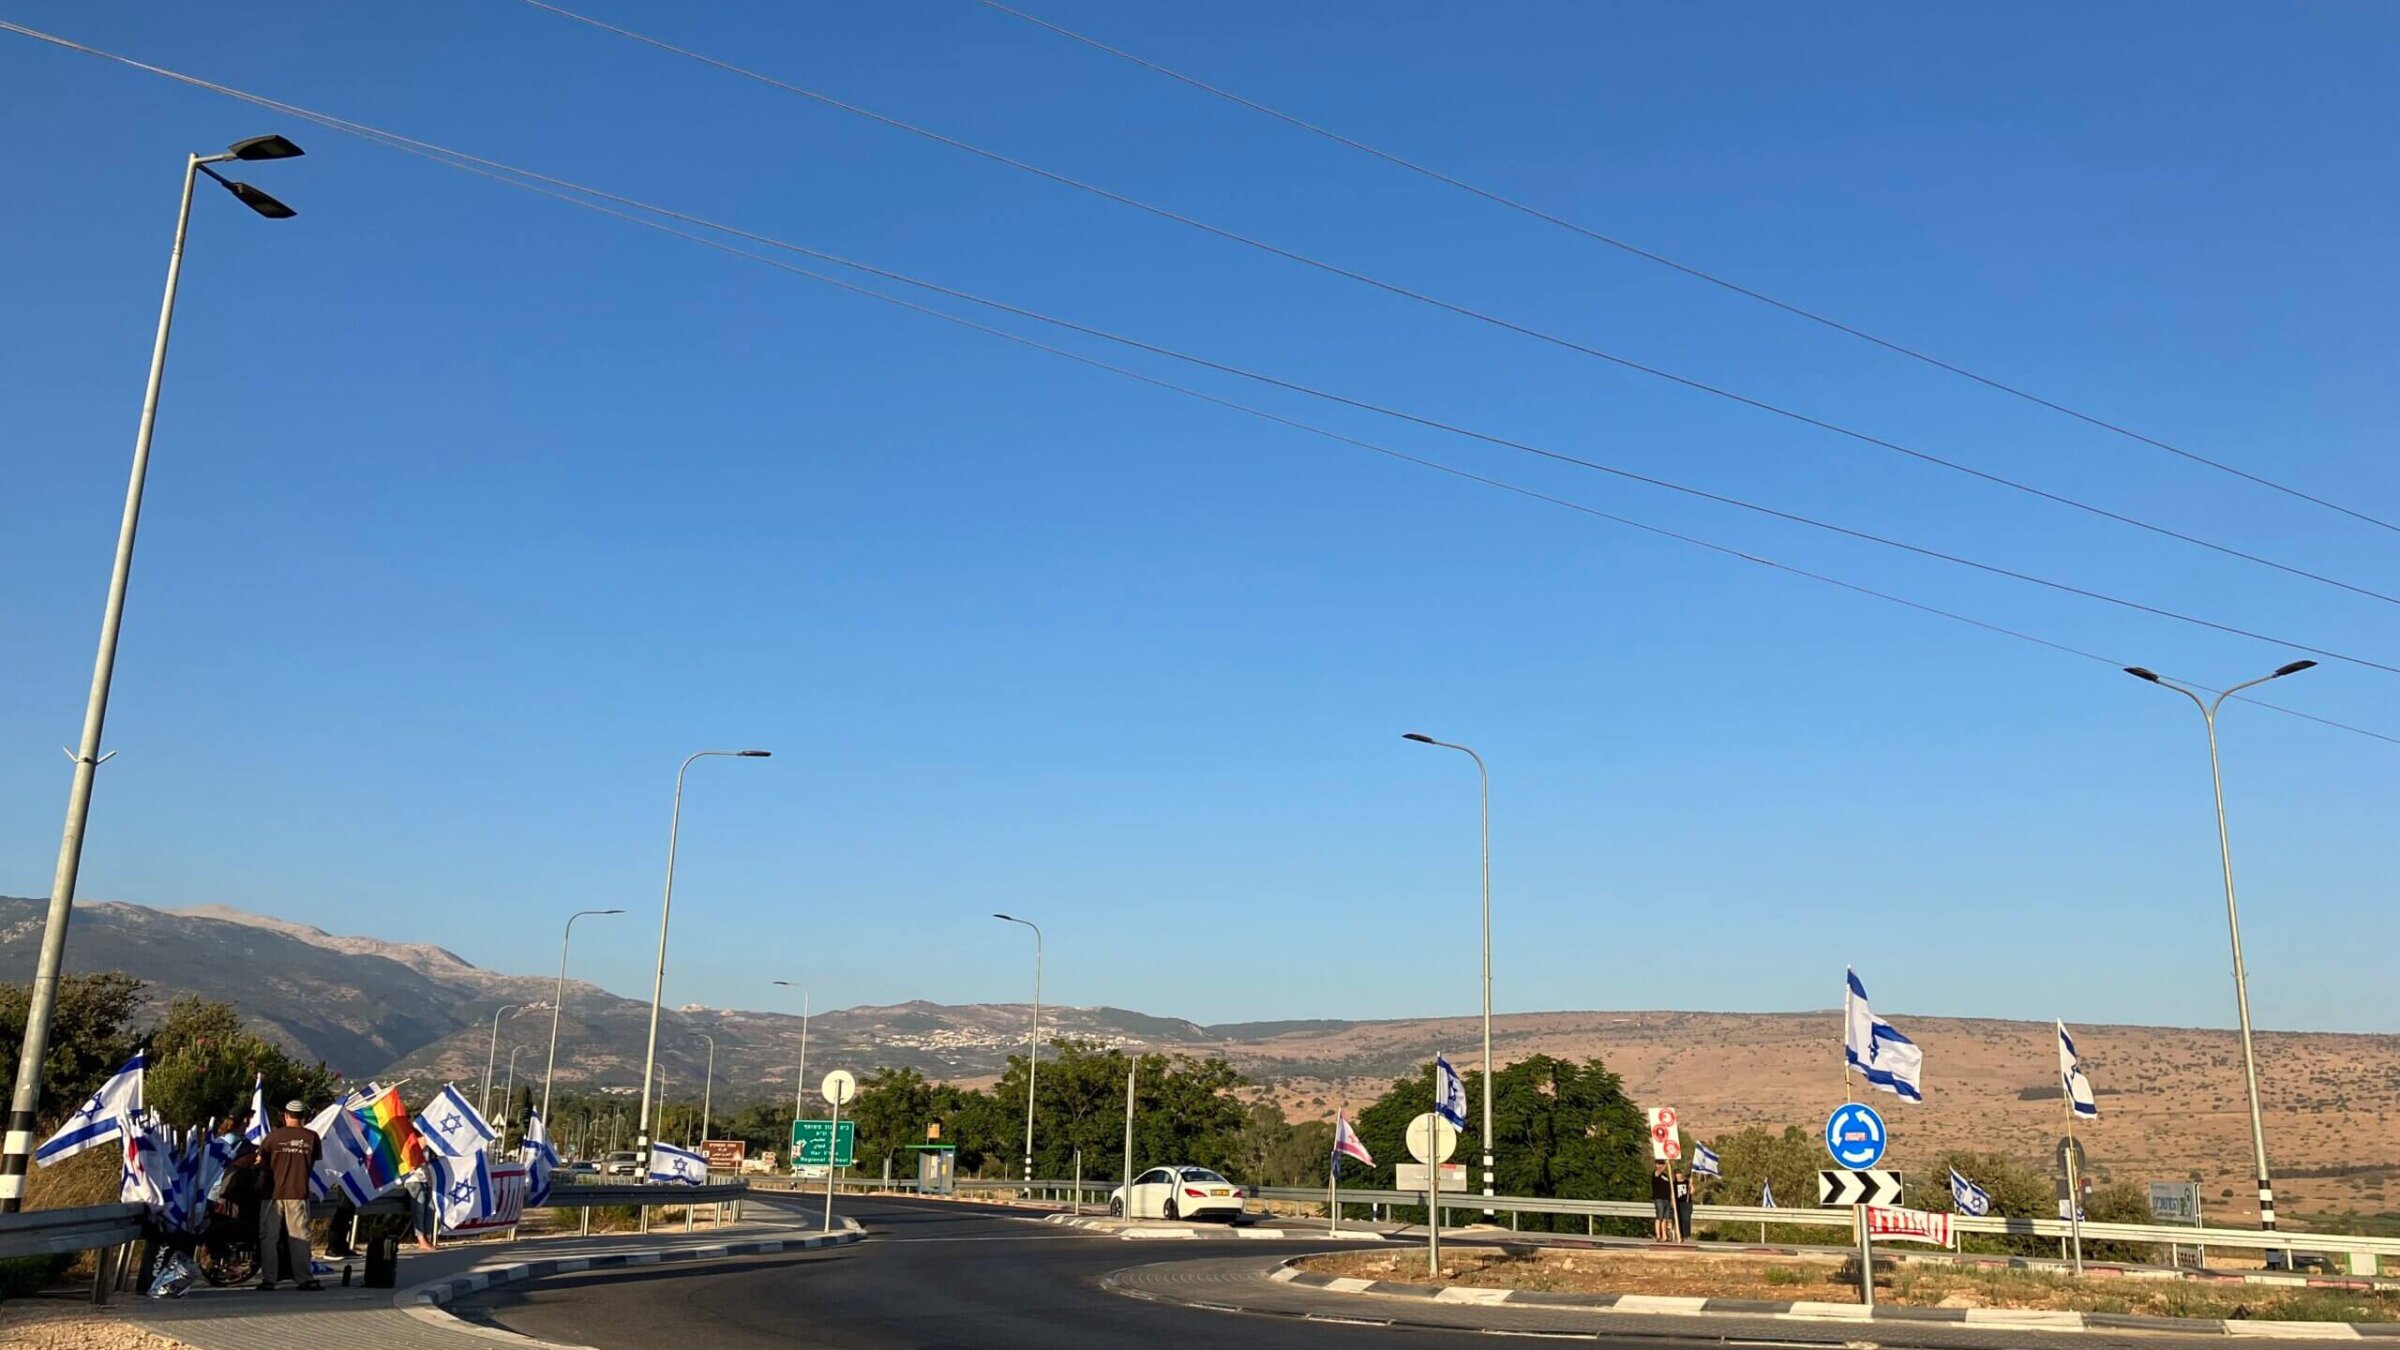 The small protest around Horshat Tal junction in northern Israel's Golan Heights.